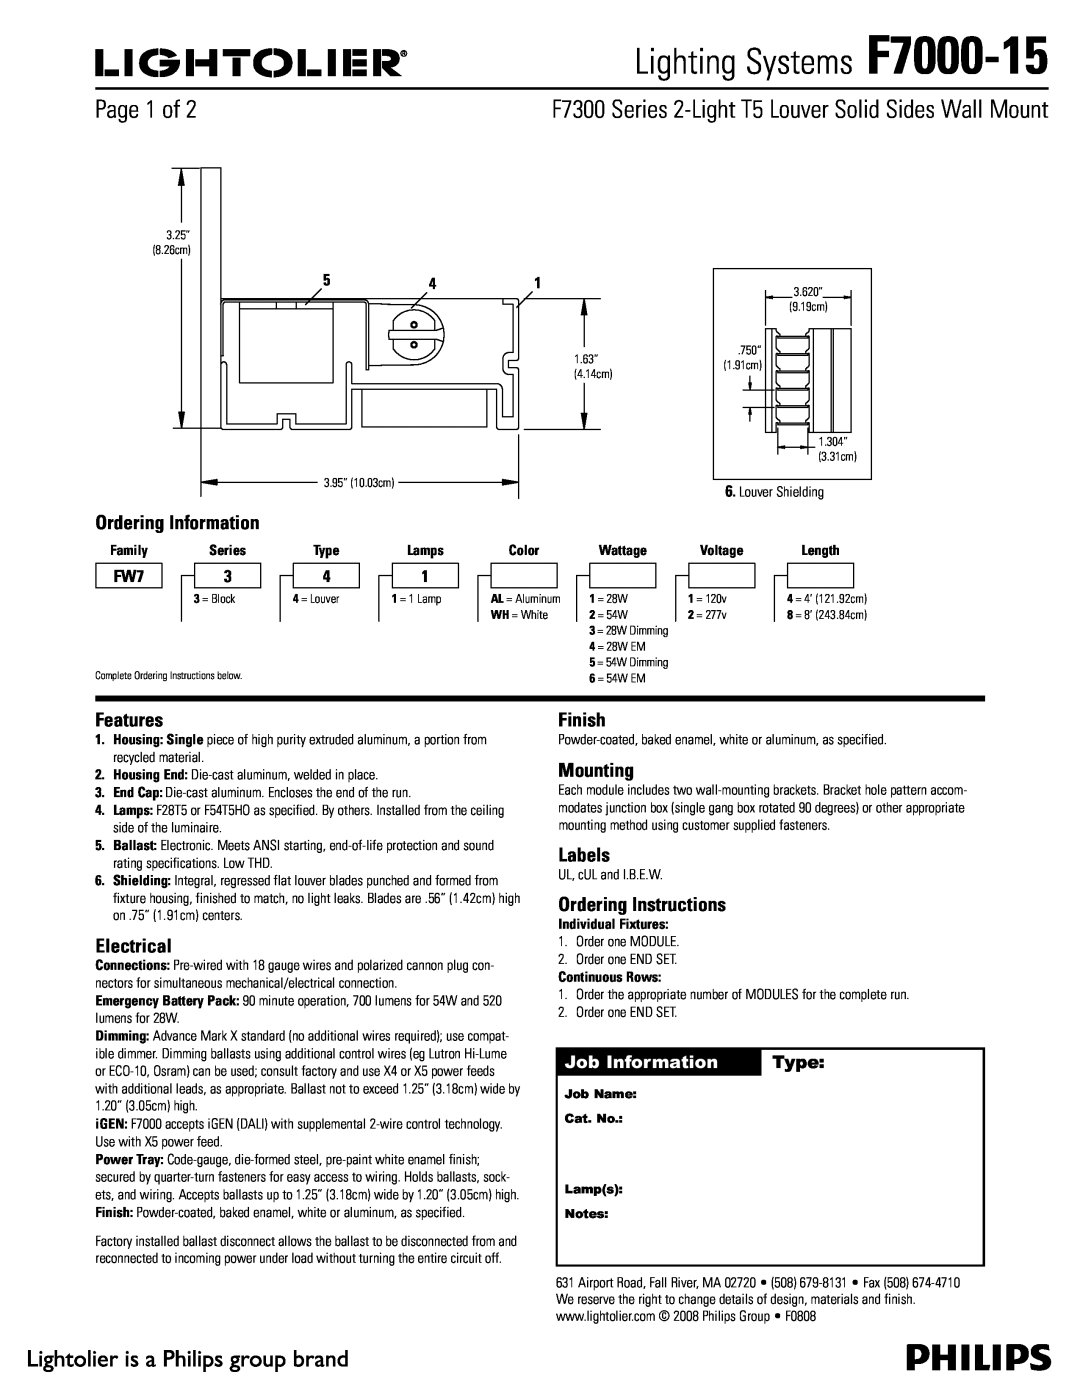 Lightolier specifications Job Information, Type, Lighting Systems F7000-15, Ordering Information, Features, Electrical 